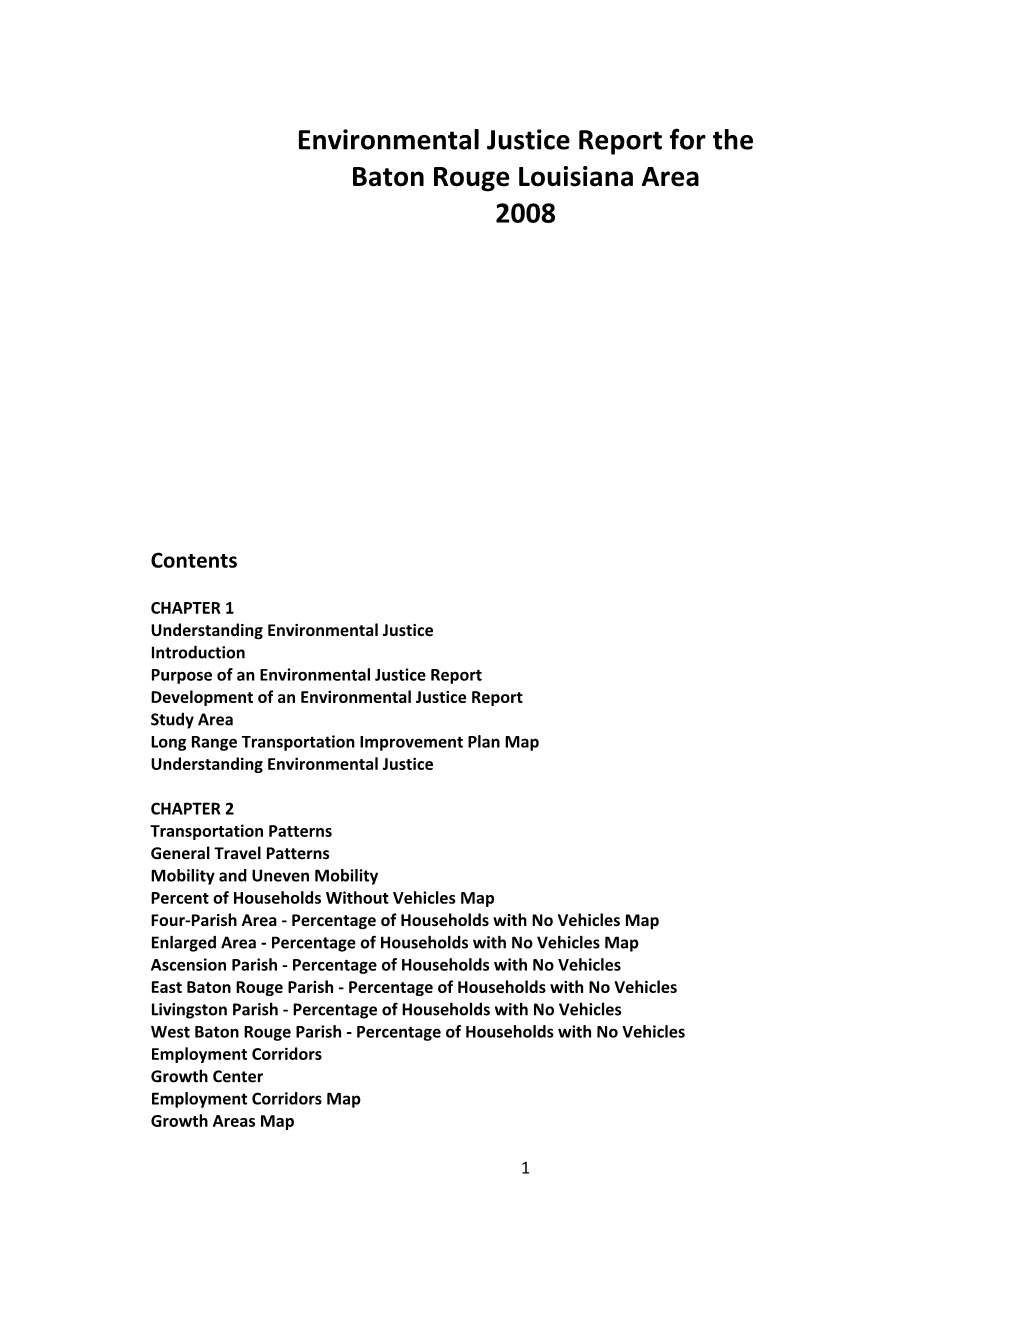 Environmental Justice Report for the Baton Rouge Louisiana Area 2008